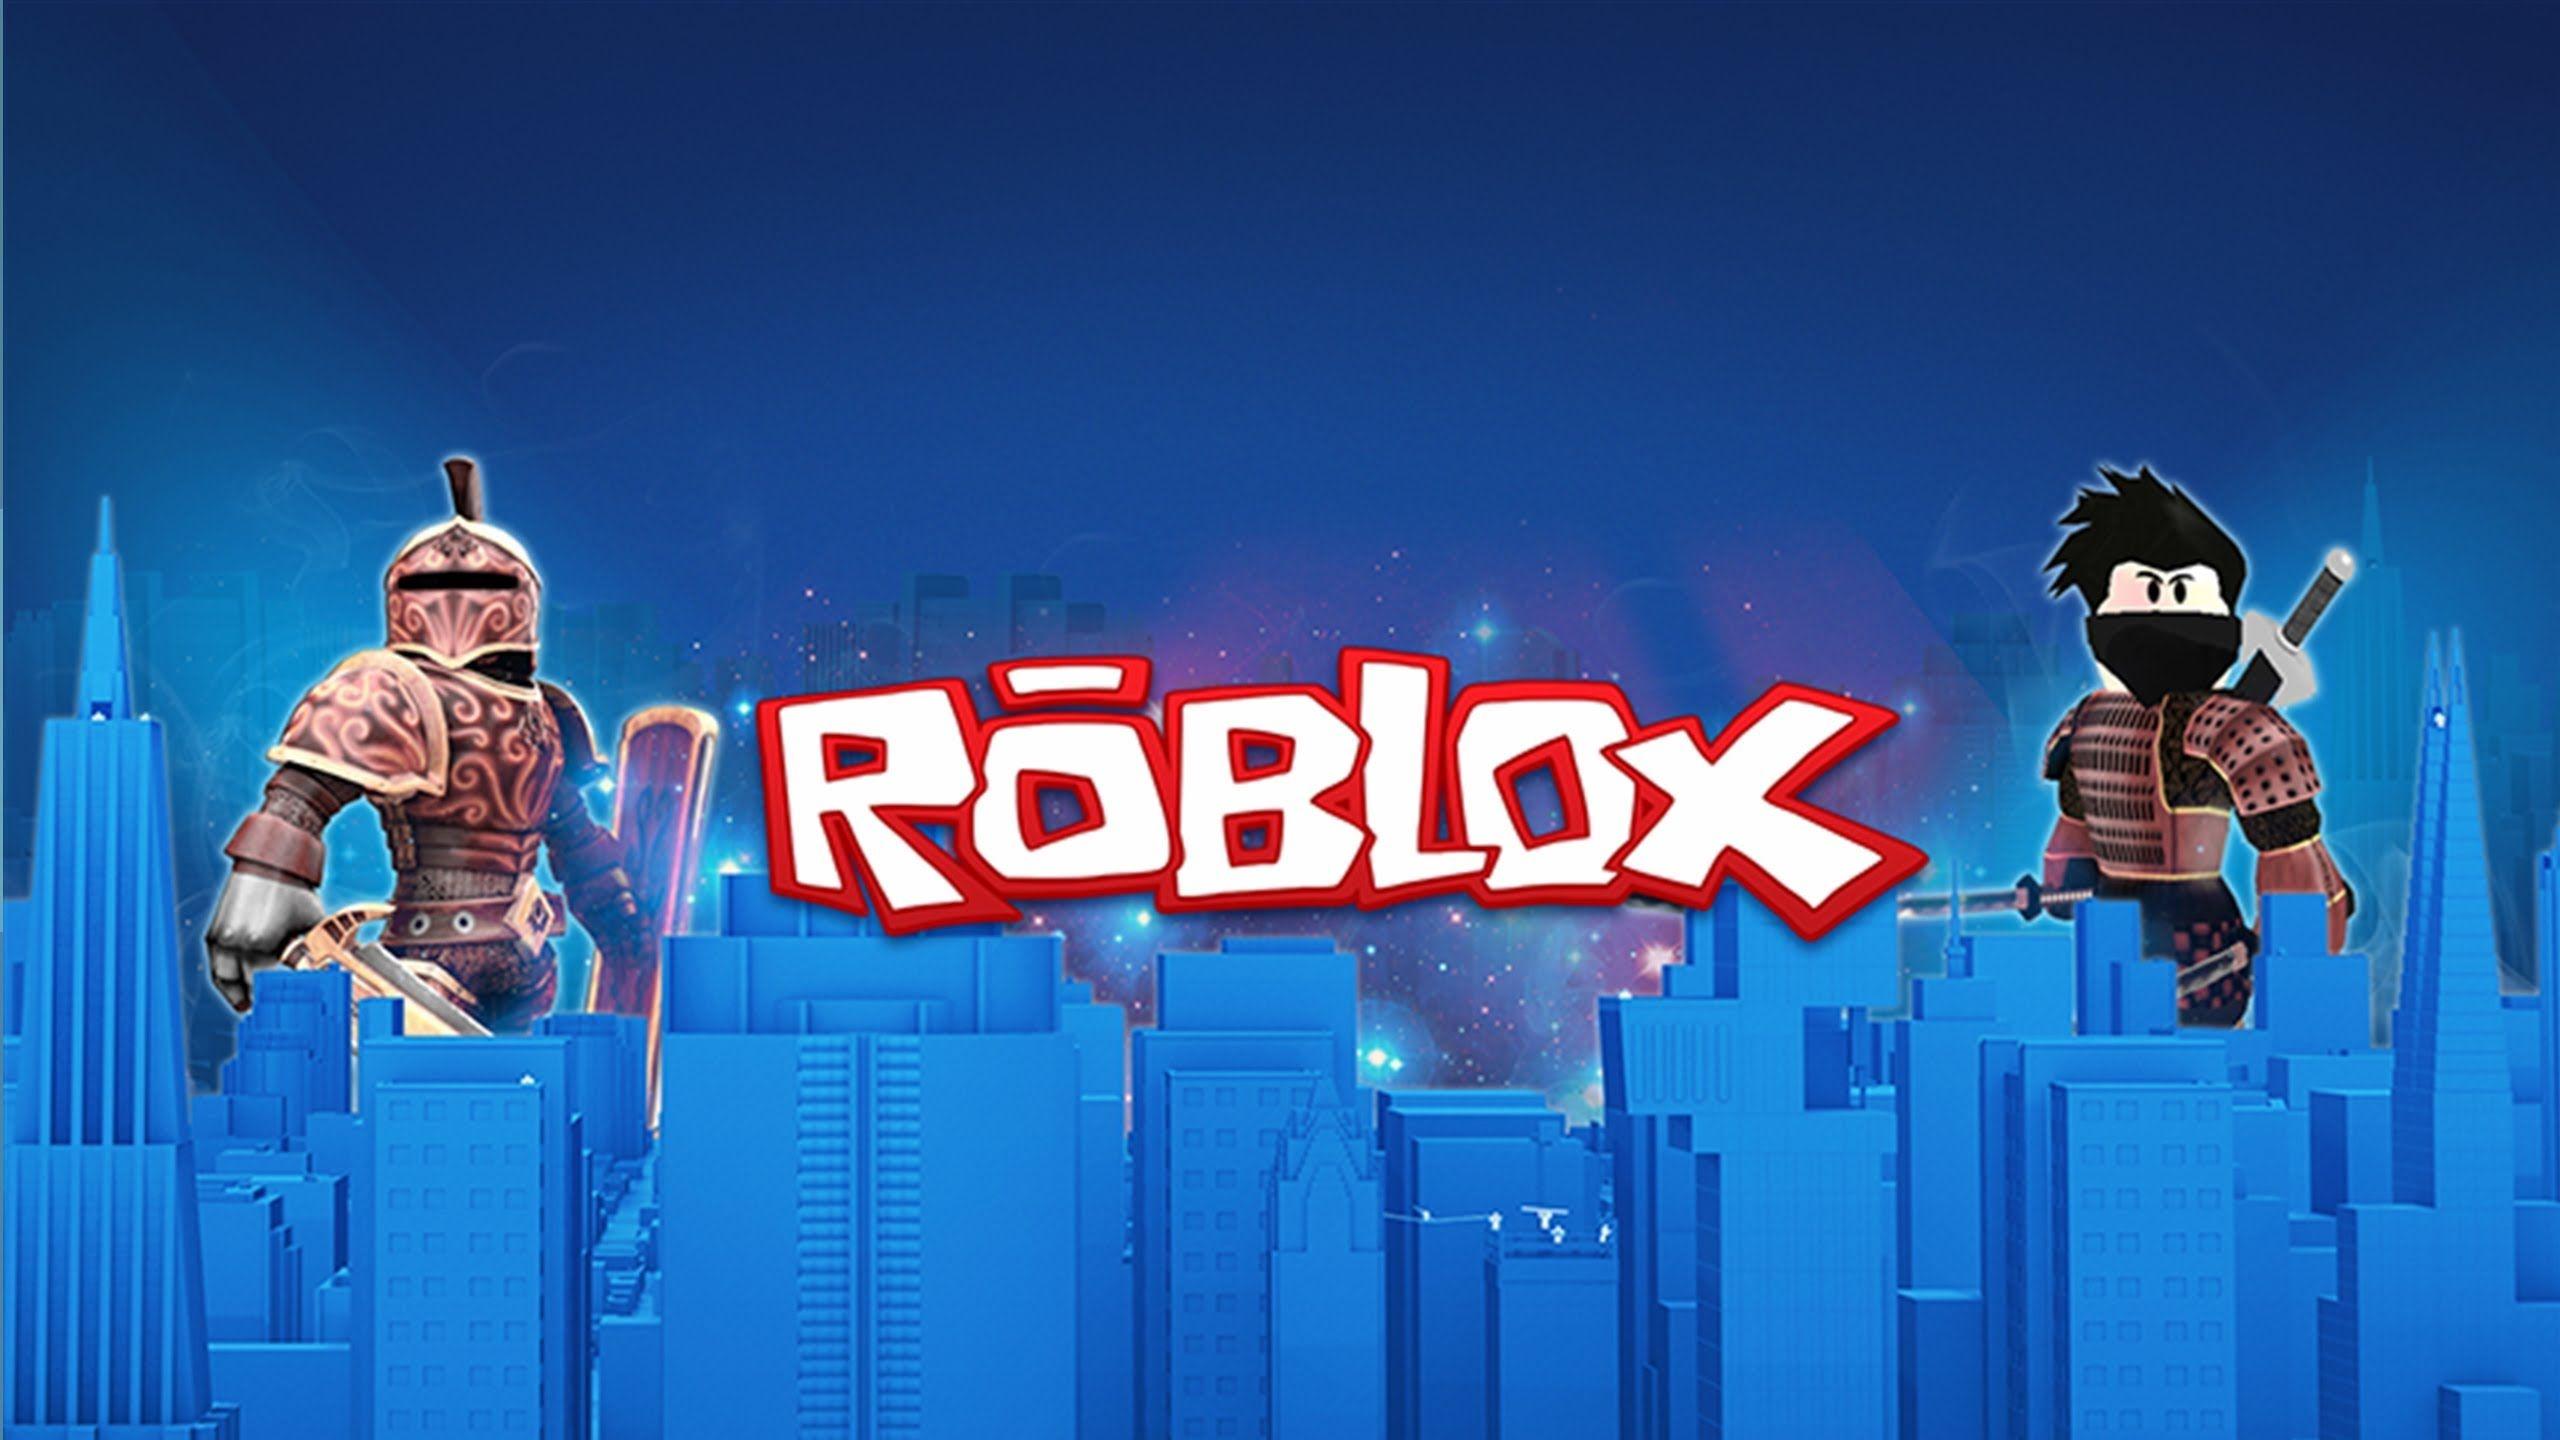 Cool Roblox Logo - Roblox: What parents must know about this dangerous game for kids